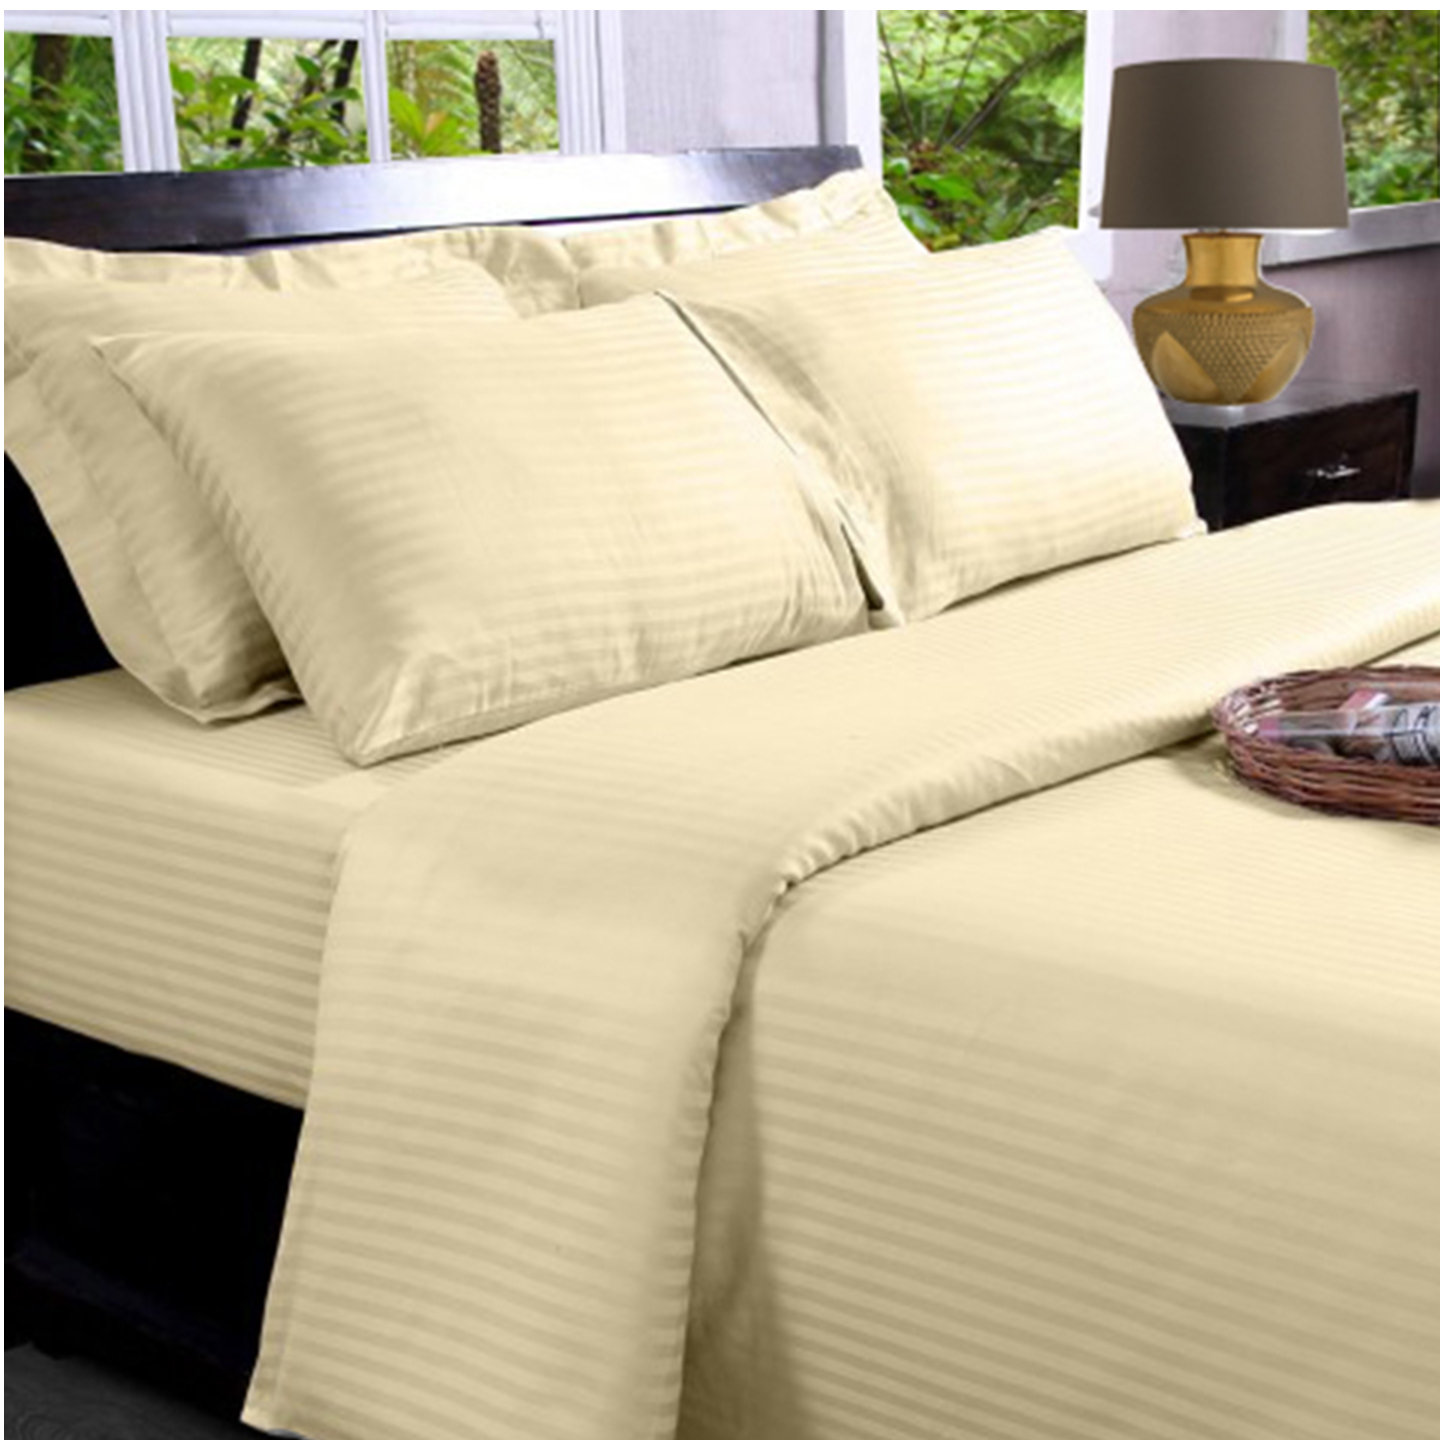 Pastel Butter Yellow - 100% Cotton - 330 Thread Count Sateen Fitted Sheets -  Queen Size